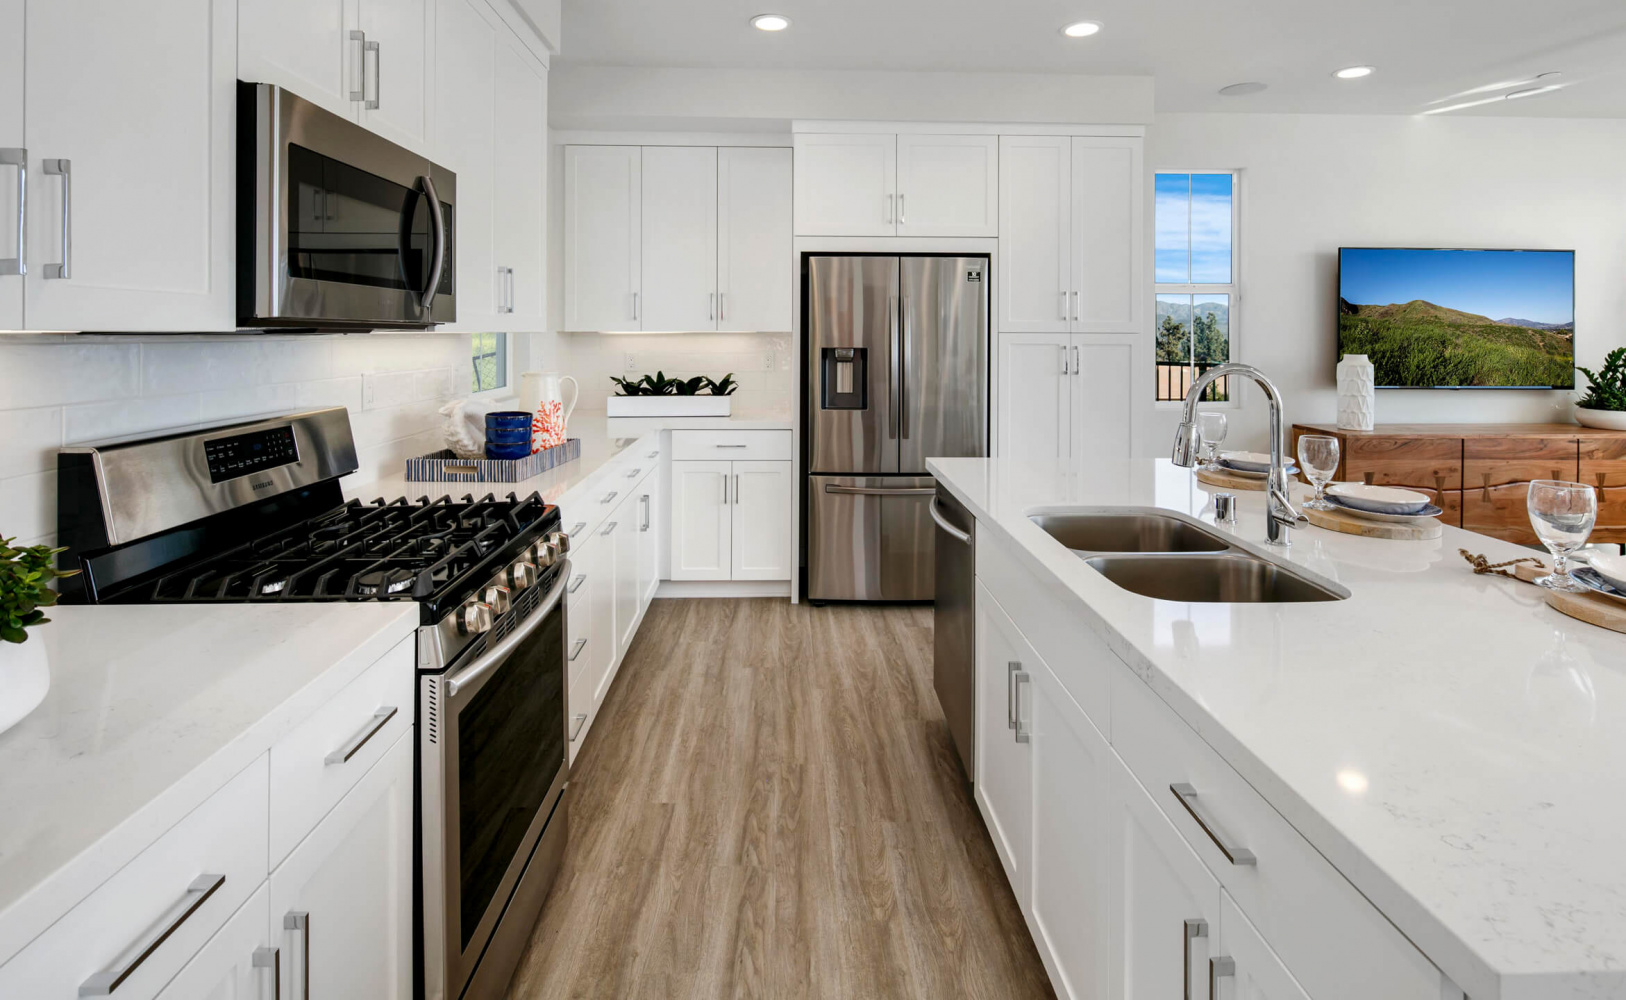 New Homes, Homes for Sales in Lake View Terrace, 4 bedroom homes in Lake View Terrace, 4 bedroom homes, 4 bedroom homes in San Fernando Valley, San Fernando Valley, New Homes for Sale, Homes close to Santa Clarita, Homes close to Burbank, Homes for sale close to Glendale